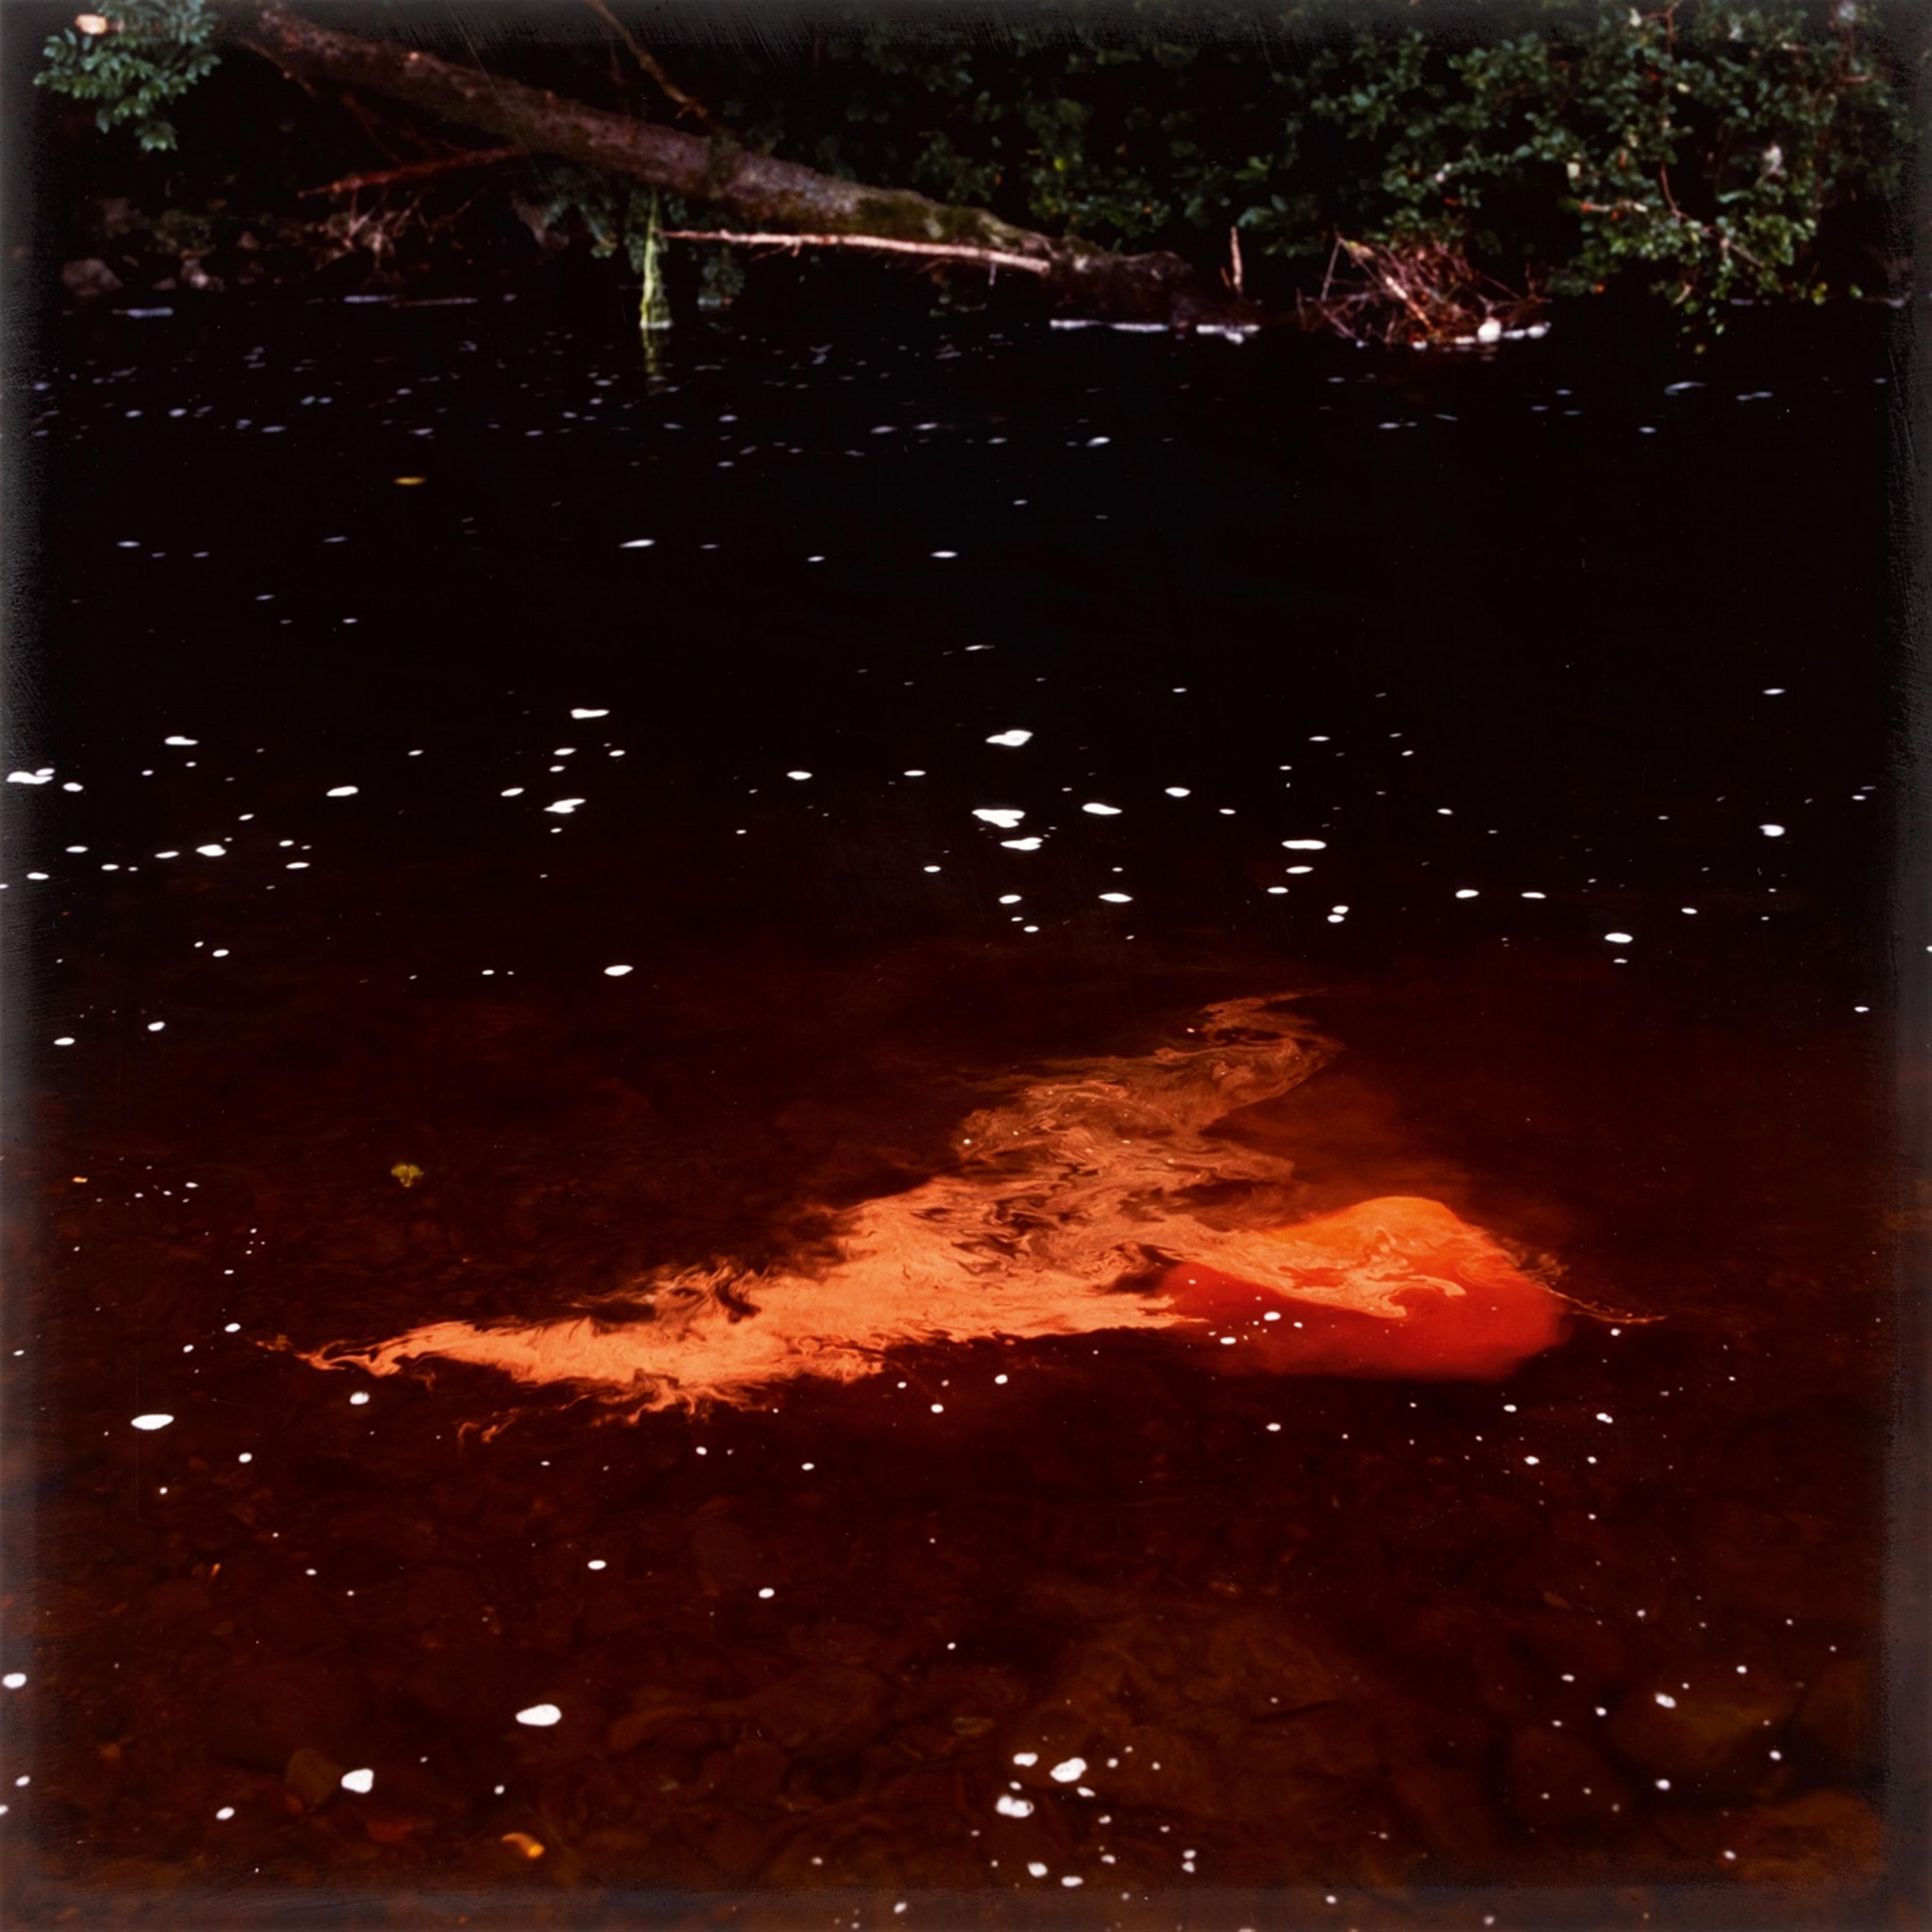 Andy Goldsworthy - River Rock, drawn over with a soft red stone, Scaur Water, Dumfriesshire - image-4